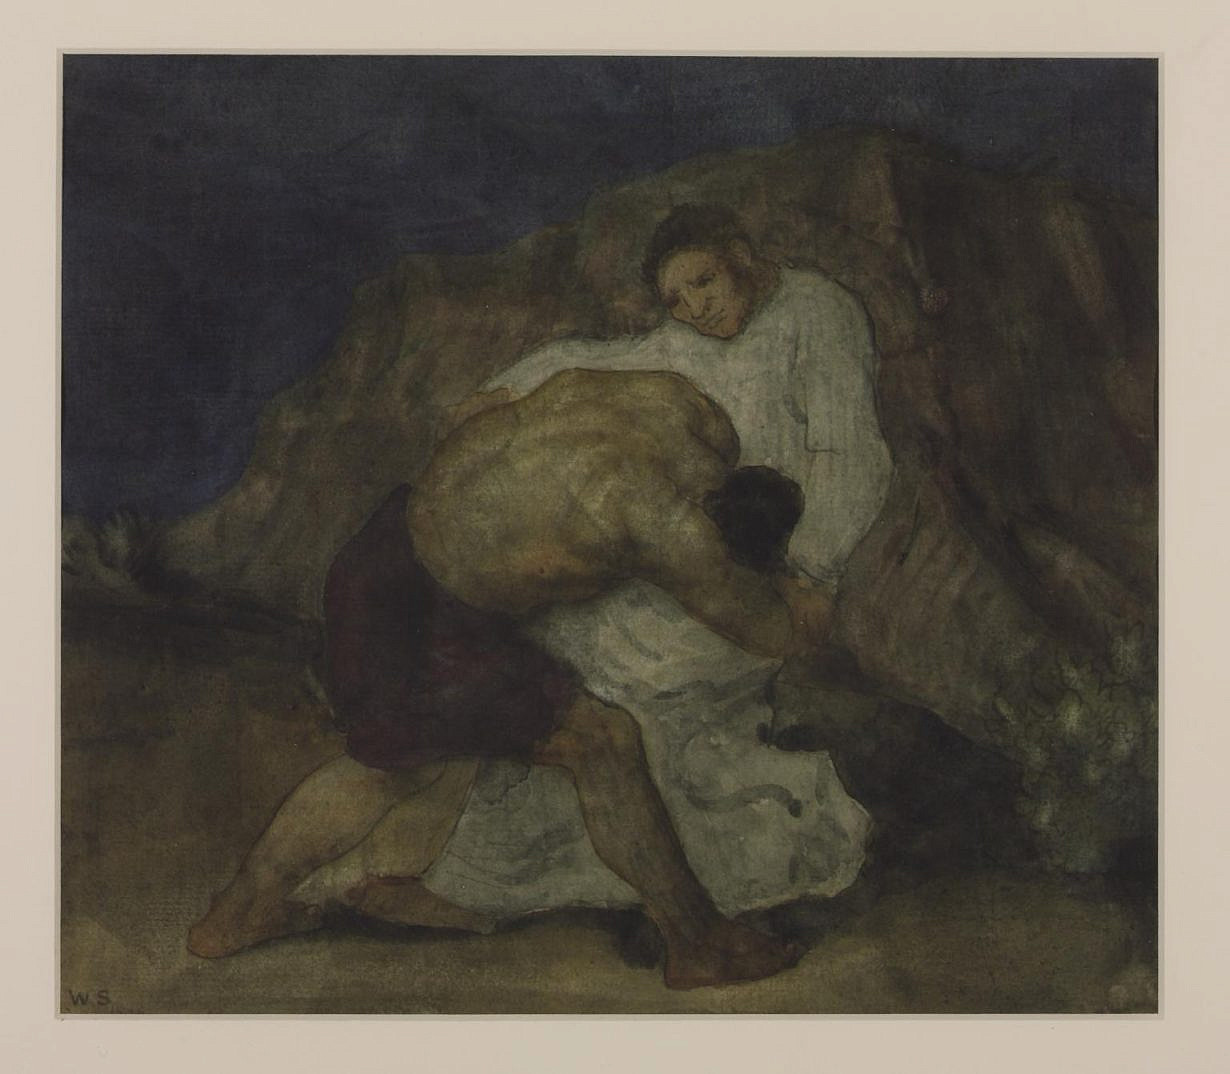 Jacob Wrestling with the Angel 1894 or 1904 William Strang 1859-1921 Presented by Sir Charles Holmes 1922 http://www.tate.org.uk/art/work/N03607